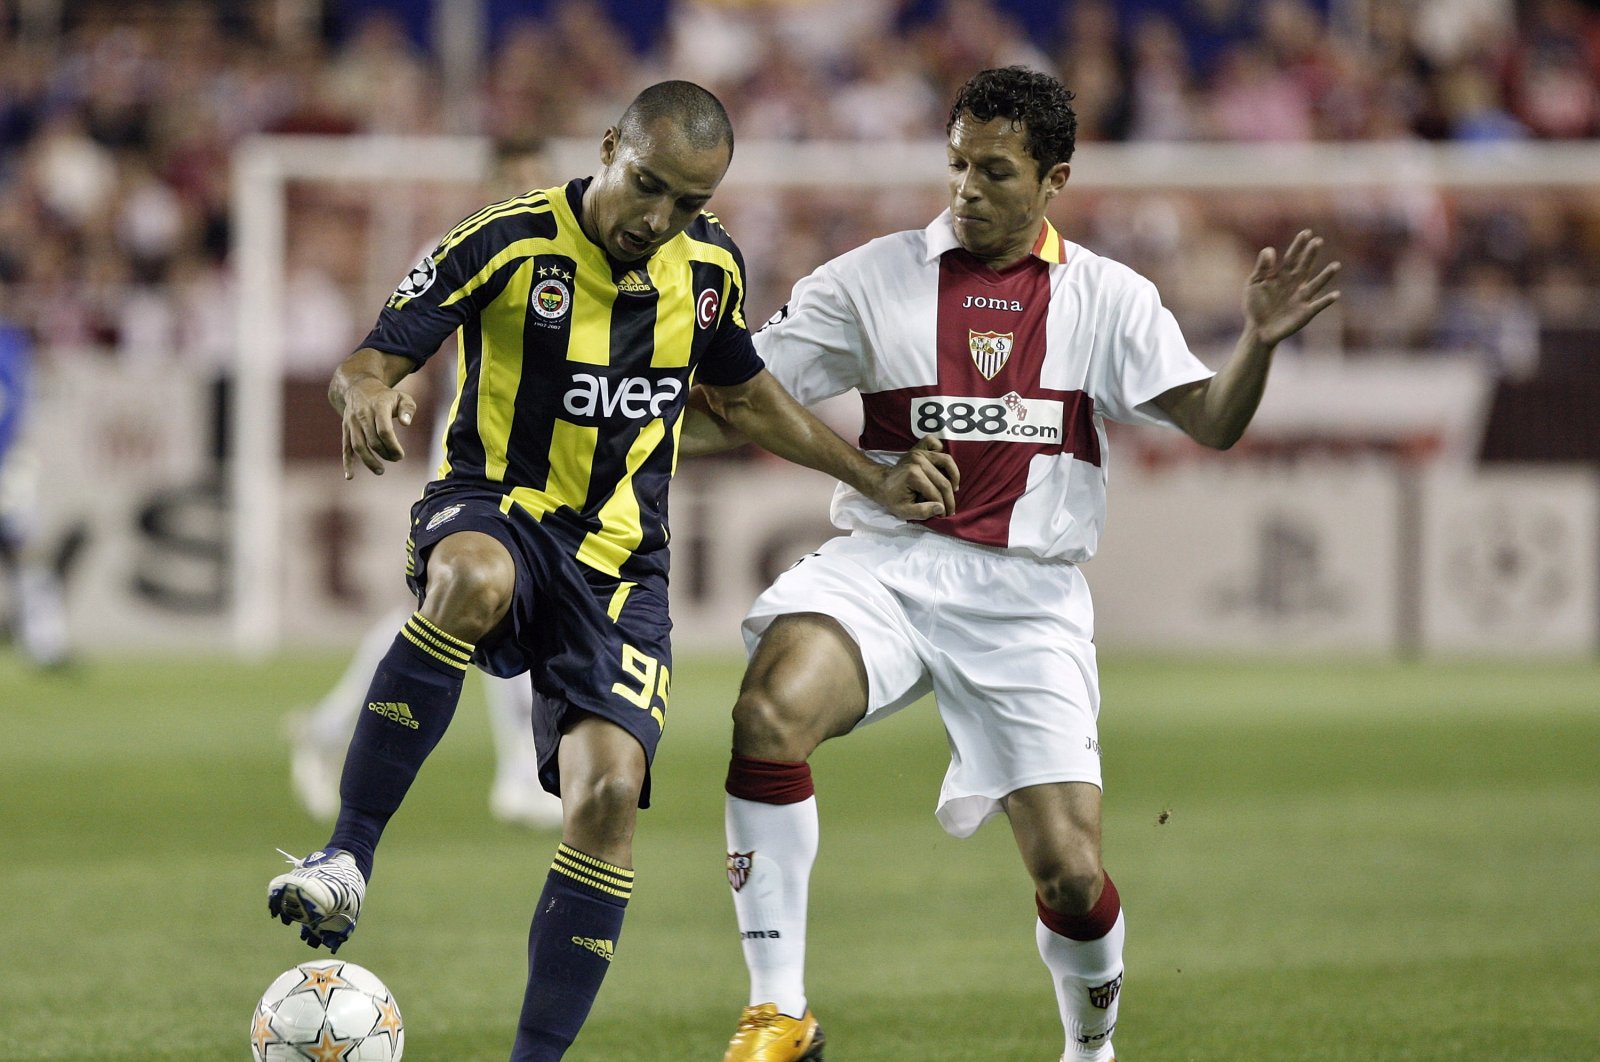 File photo of Fenerbahçe&#039;s Deivid (L) dueling for the ball with Sevilla&#039;s Adriano during the UEFA Champions League first knockout round 2nd leg match at the Ramon Sanchez-Pizjuan, Seville, Spain, March 4, 2008.  (Getty Images Photo)